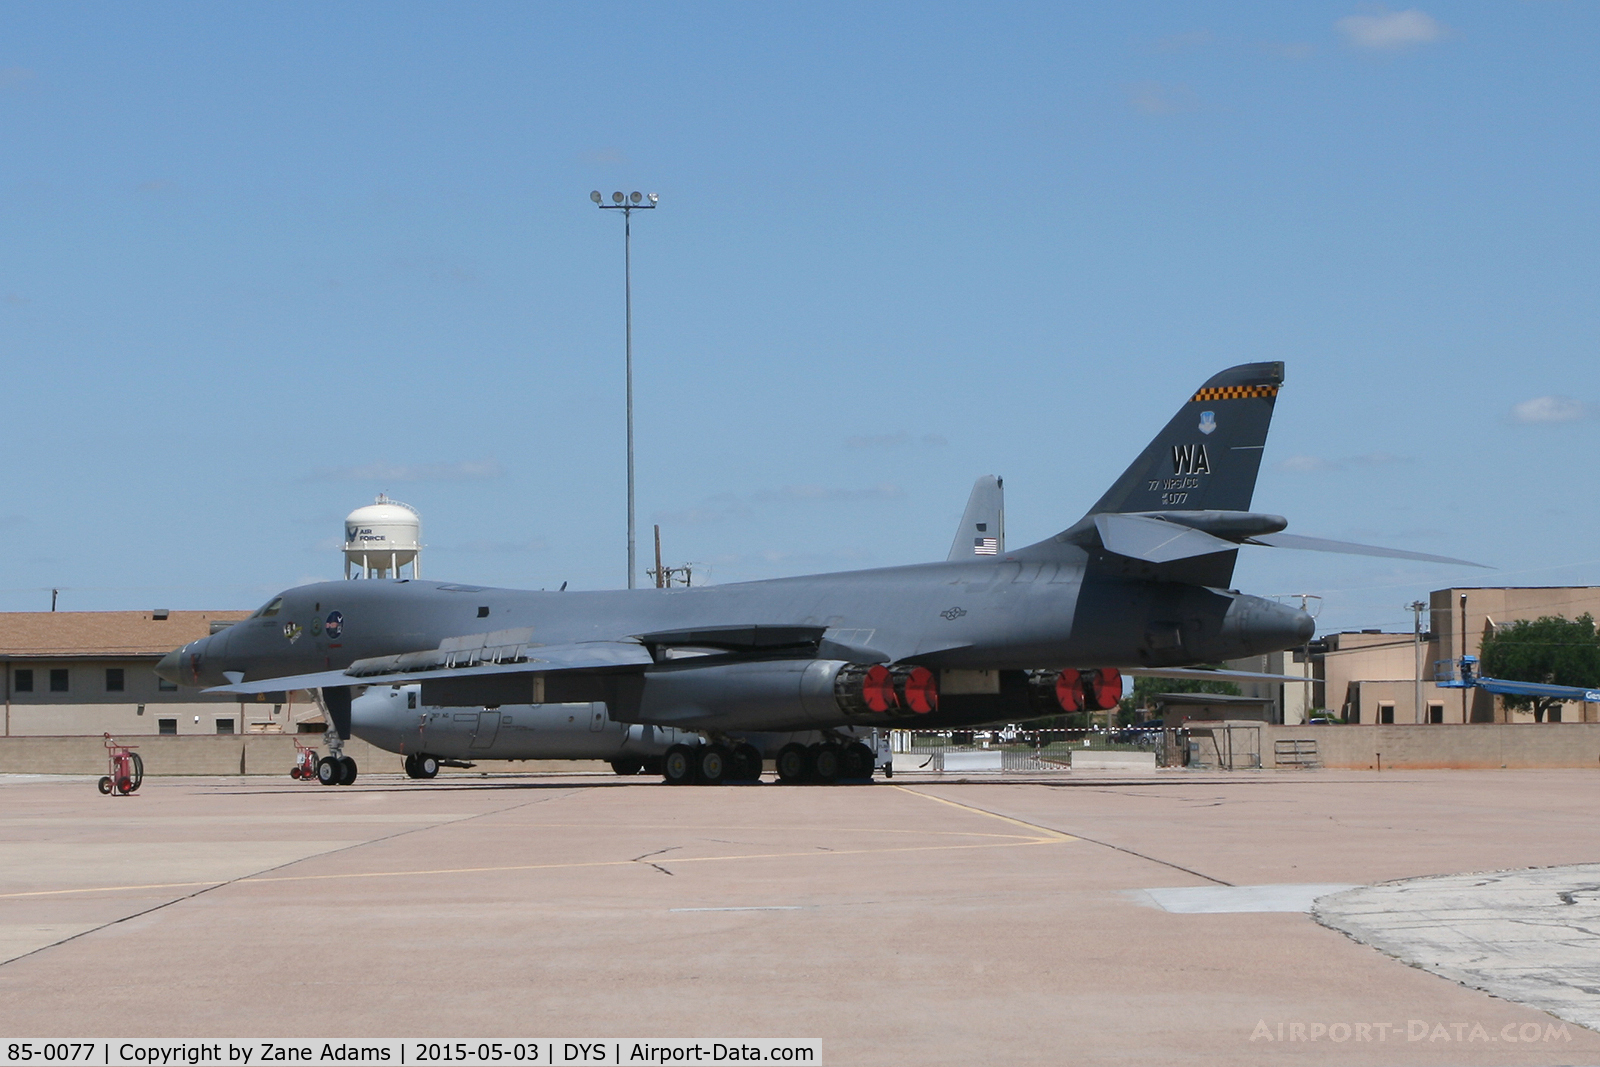 85-0077, 1985 Rockwell B-1B Lancer C/N 37, At the 2014 Big Country Airshow - Dyess AFB, TX